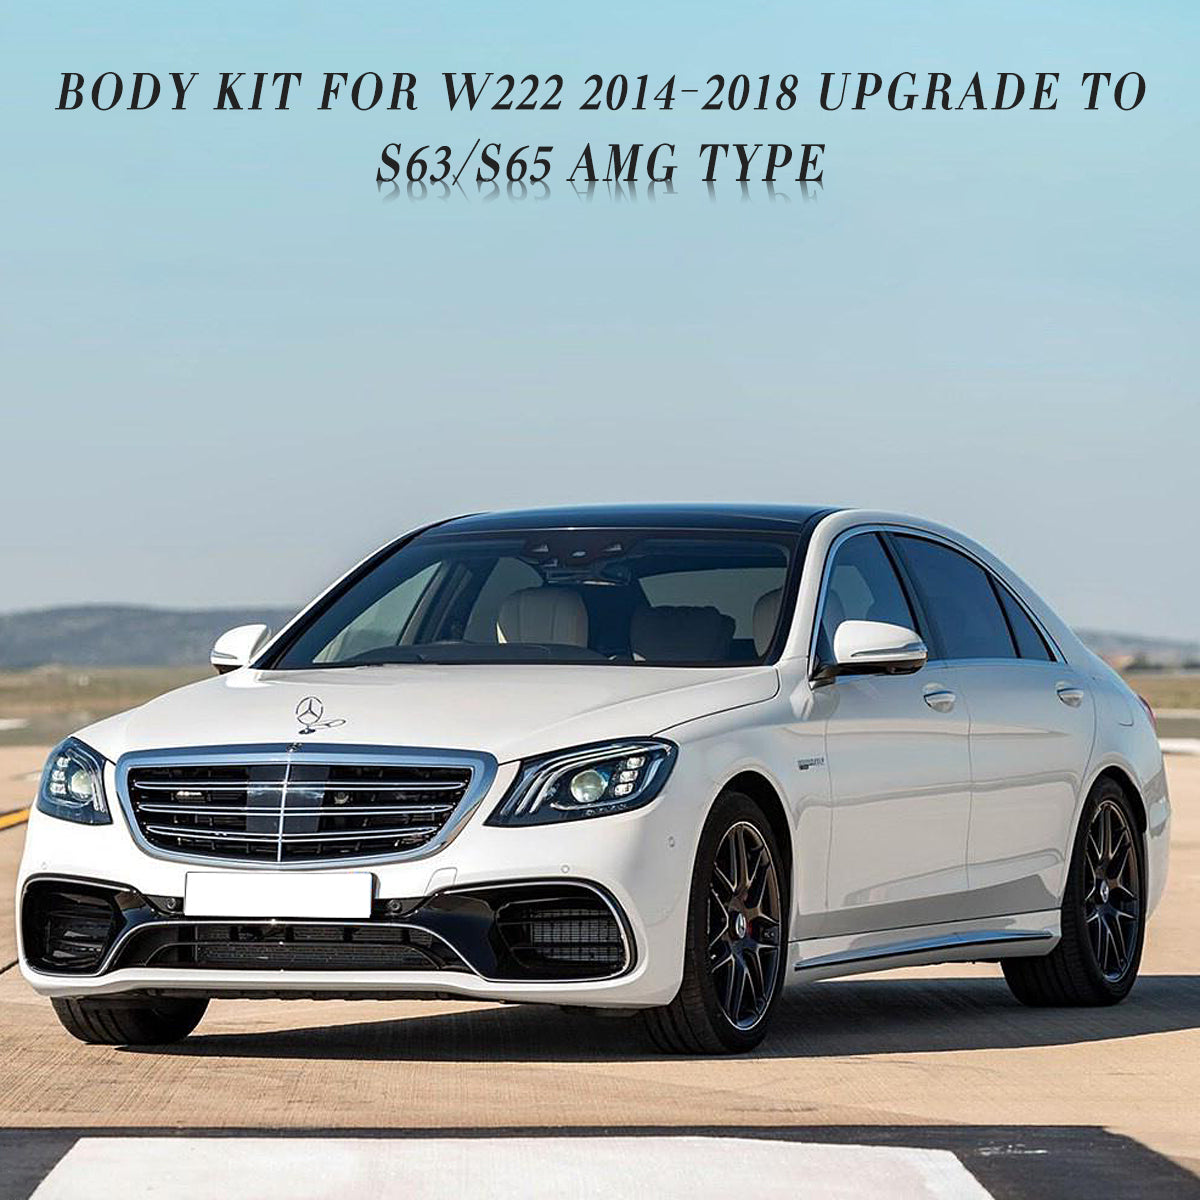 BODY KIT FOR W222 2014-2018 UPGRADE TO S63/S65 AMG TYPE